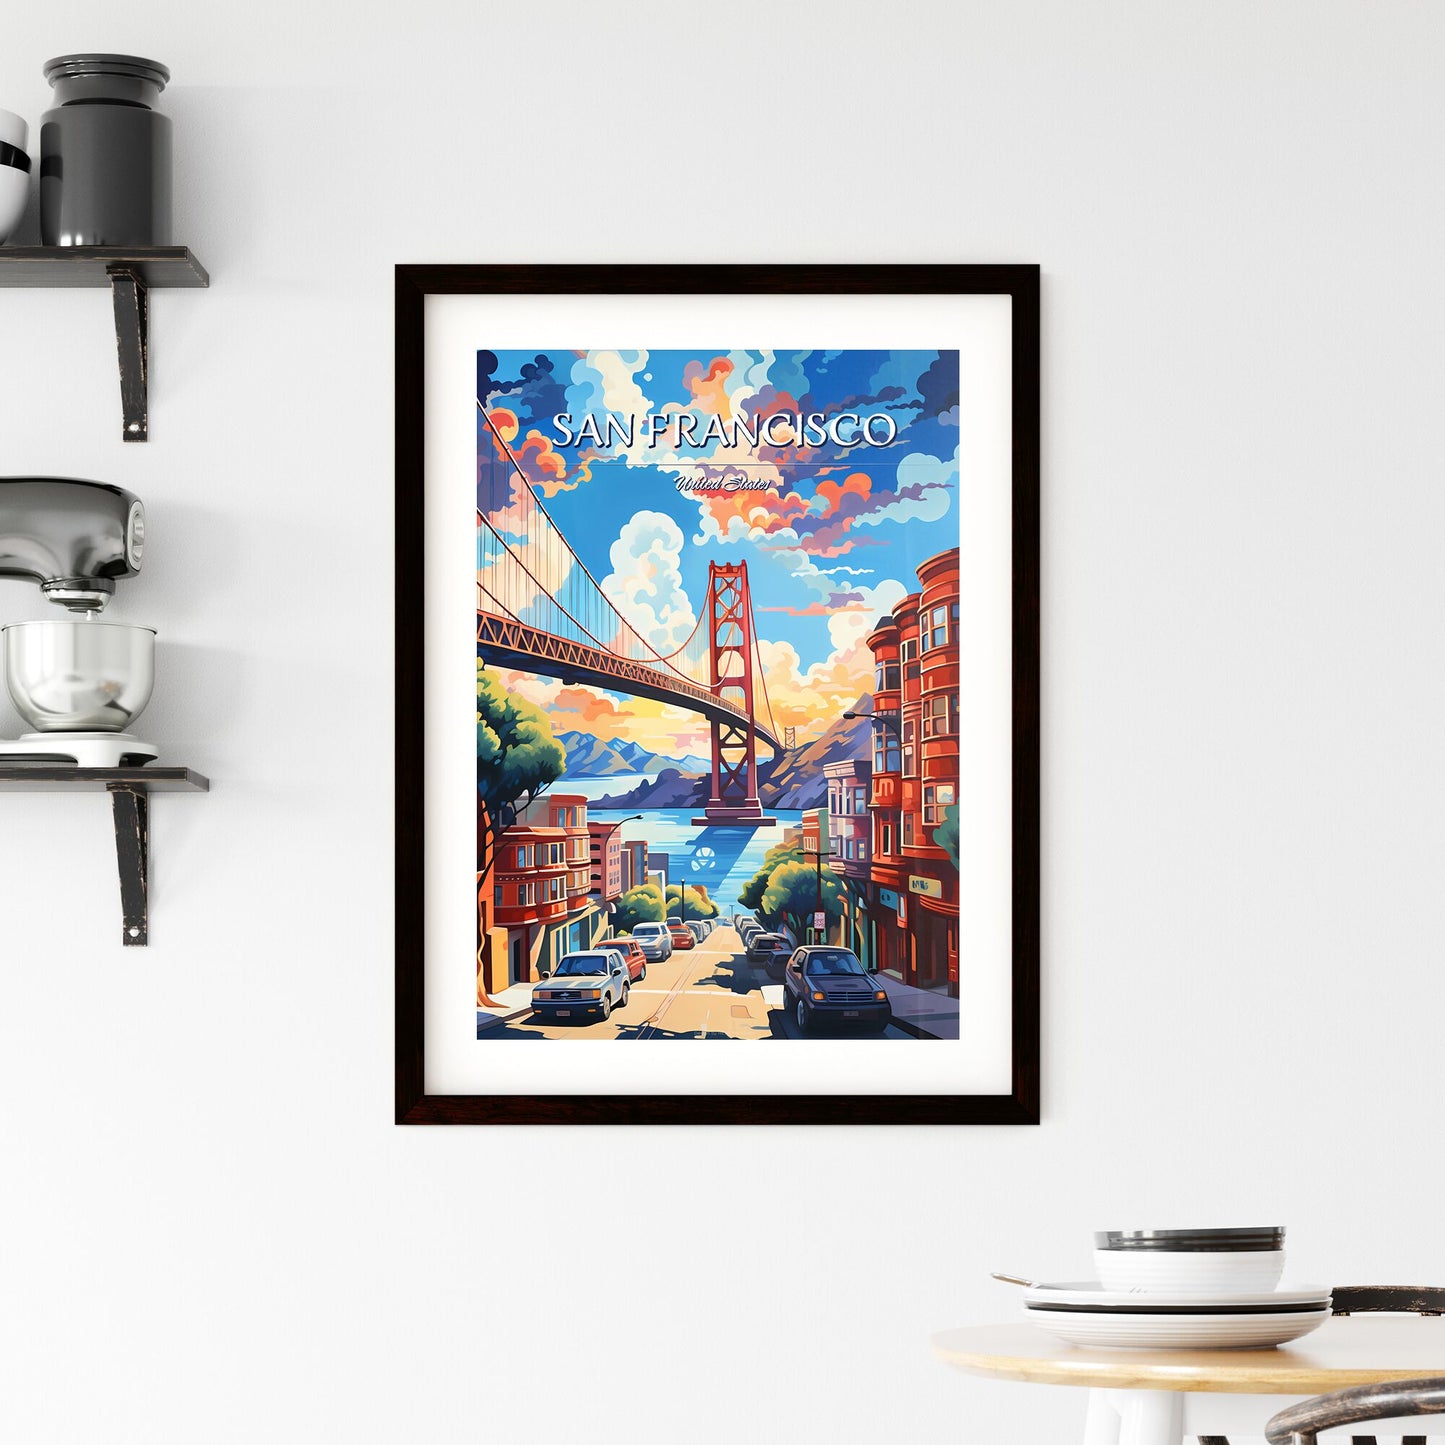 San Francisco - Art print of a bridge over water in a city Default Title